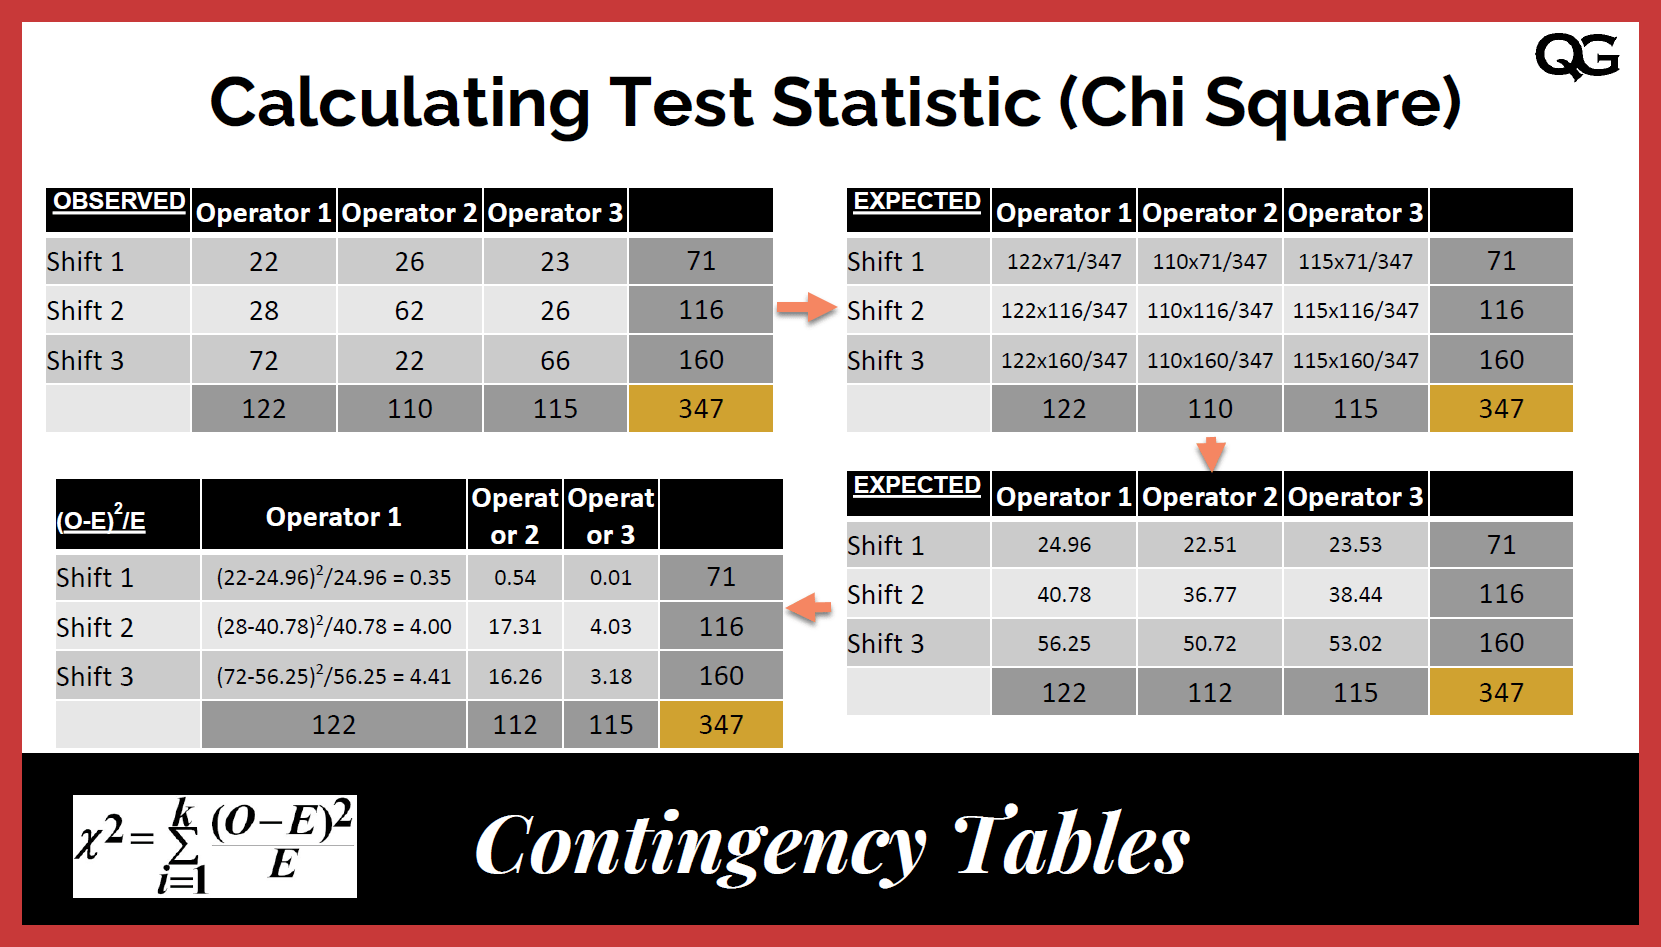 The 2*2 contingency table for chi square test.